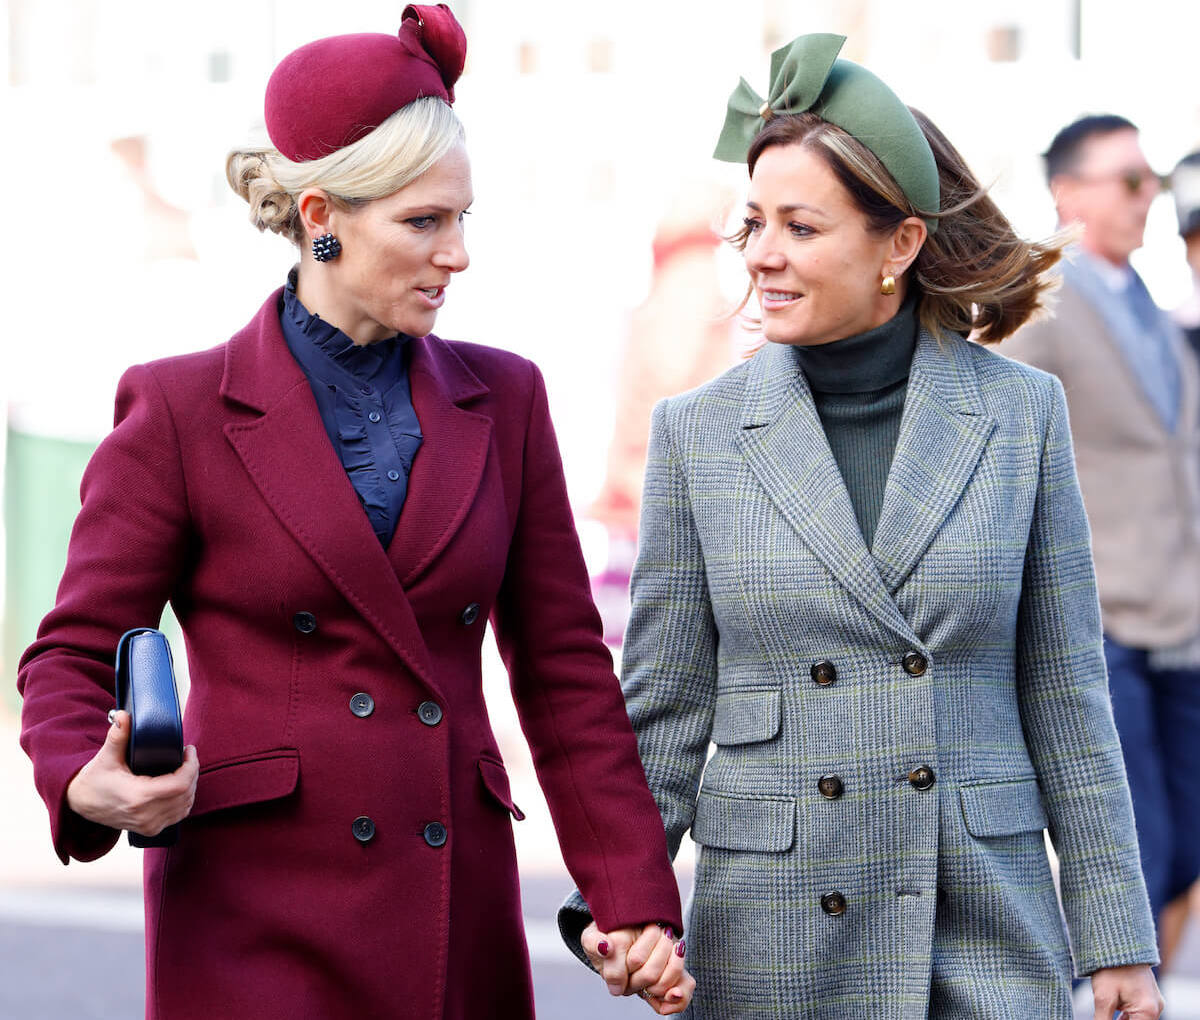 Zara Tindall, the British royal with the most 'tactile' body language, holds hands with Natalie Pinkham at the 2023 Cheltenham Festival